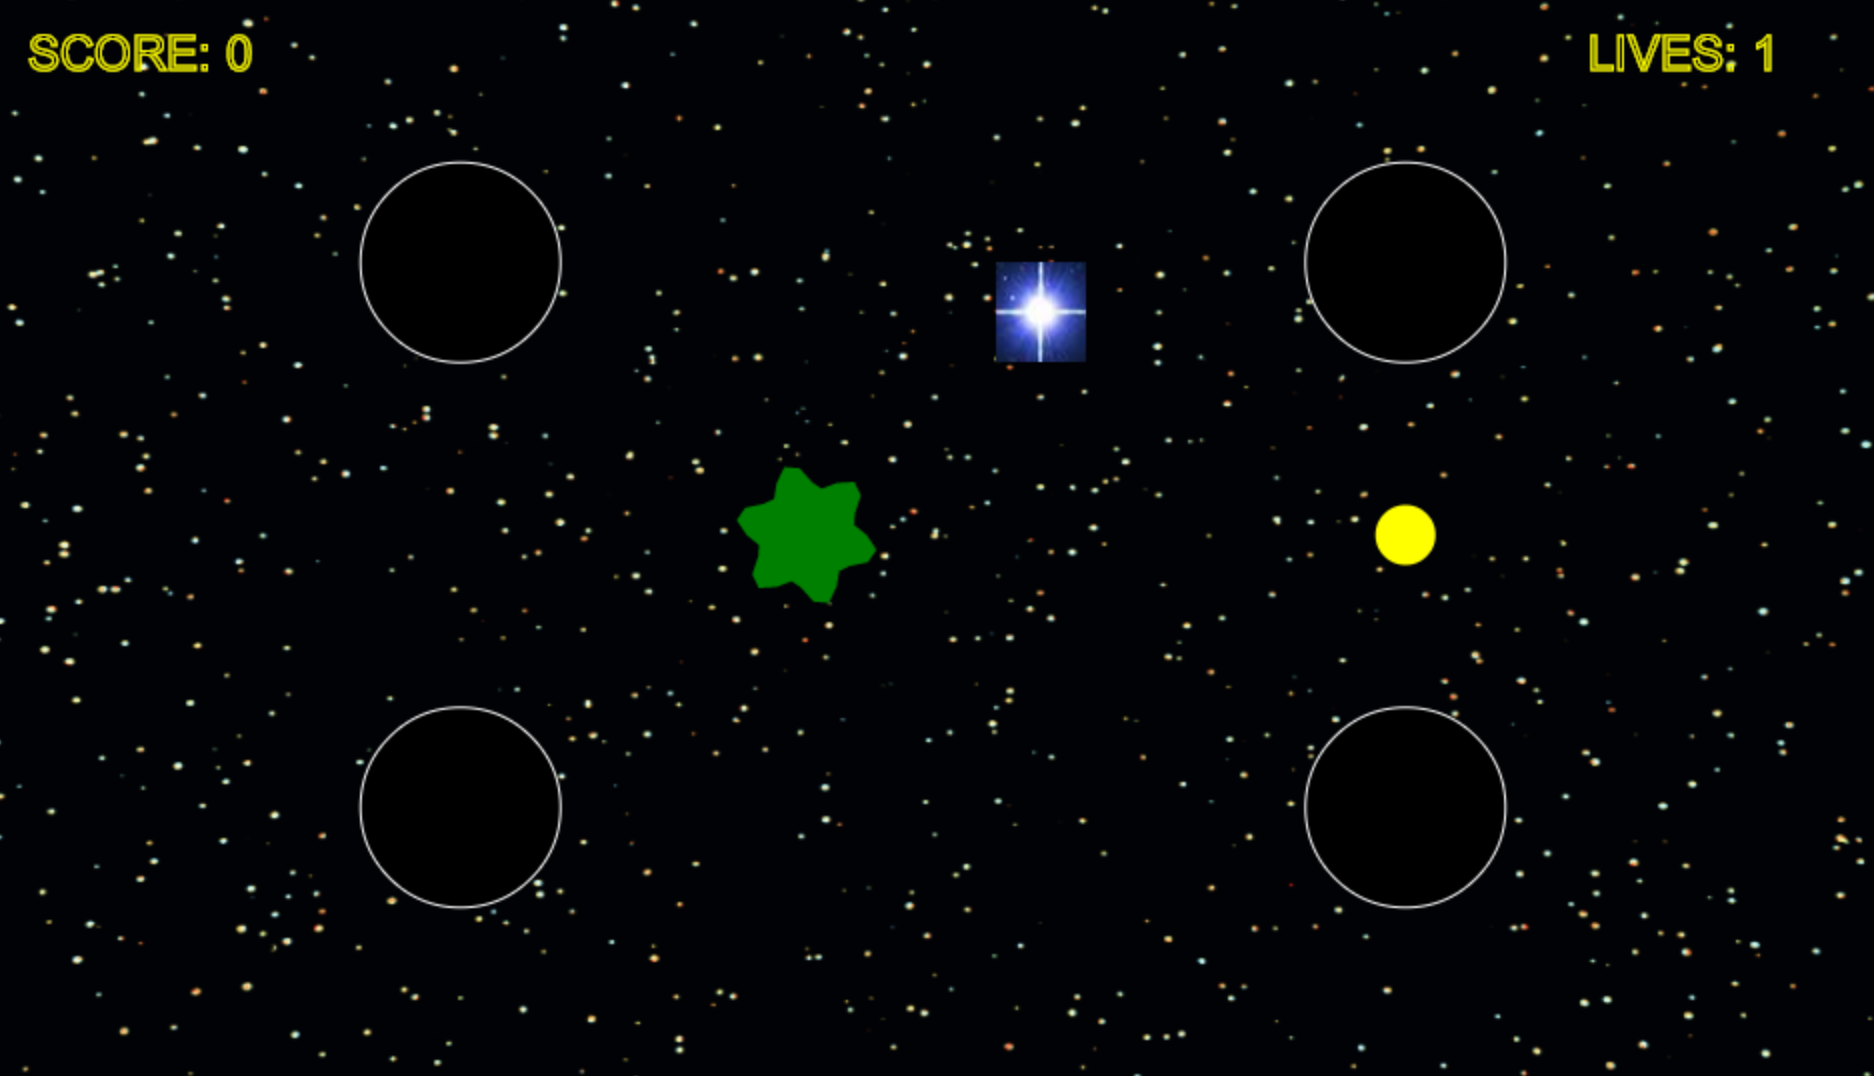 Catch the blue star game using JavaScript